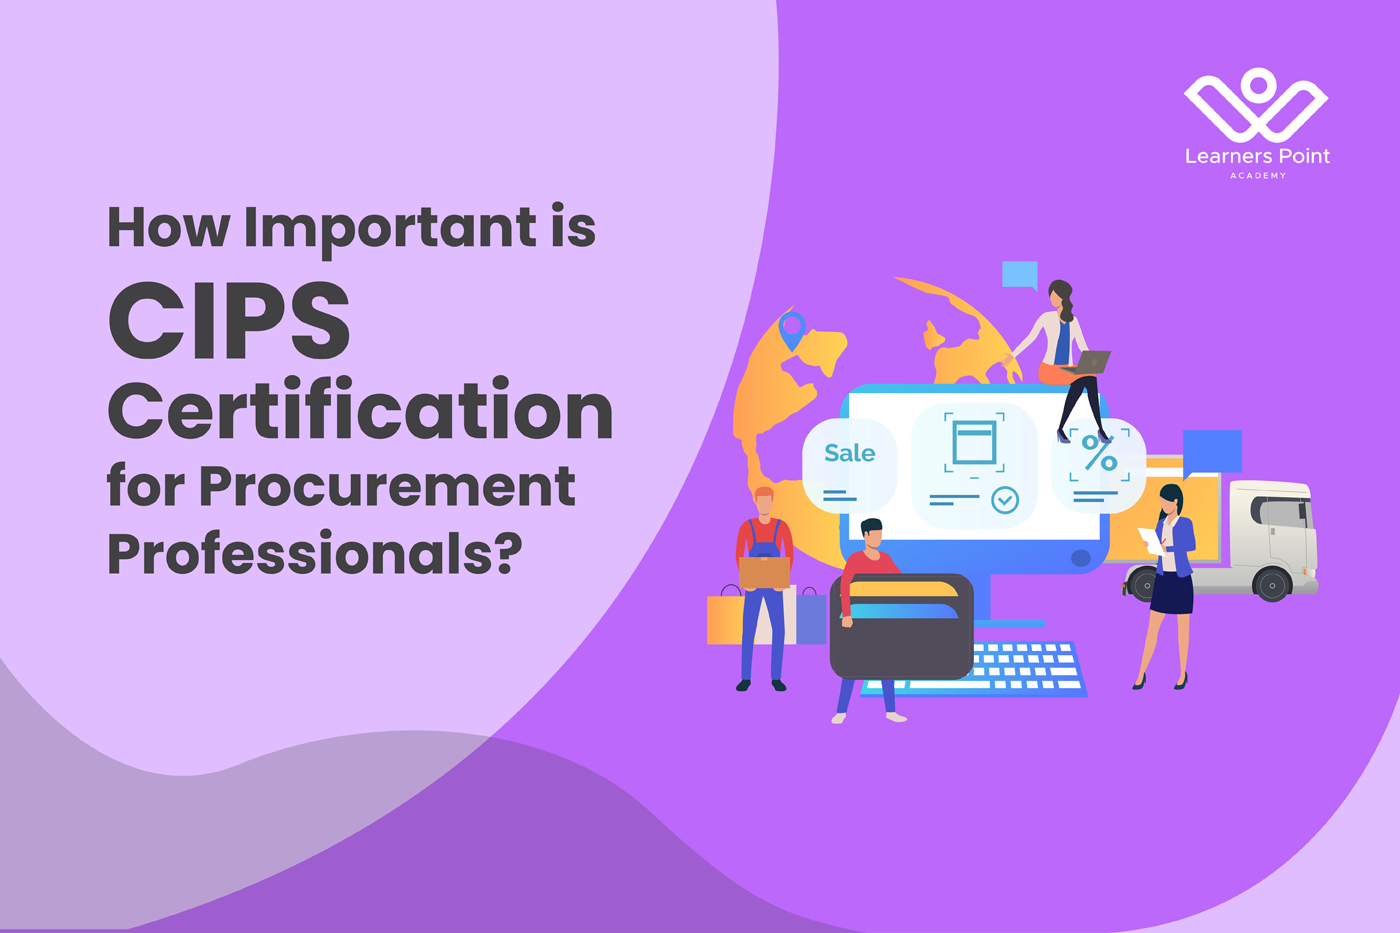 How Important is CIPS Certification for Procurement Professionals?